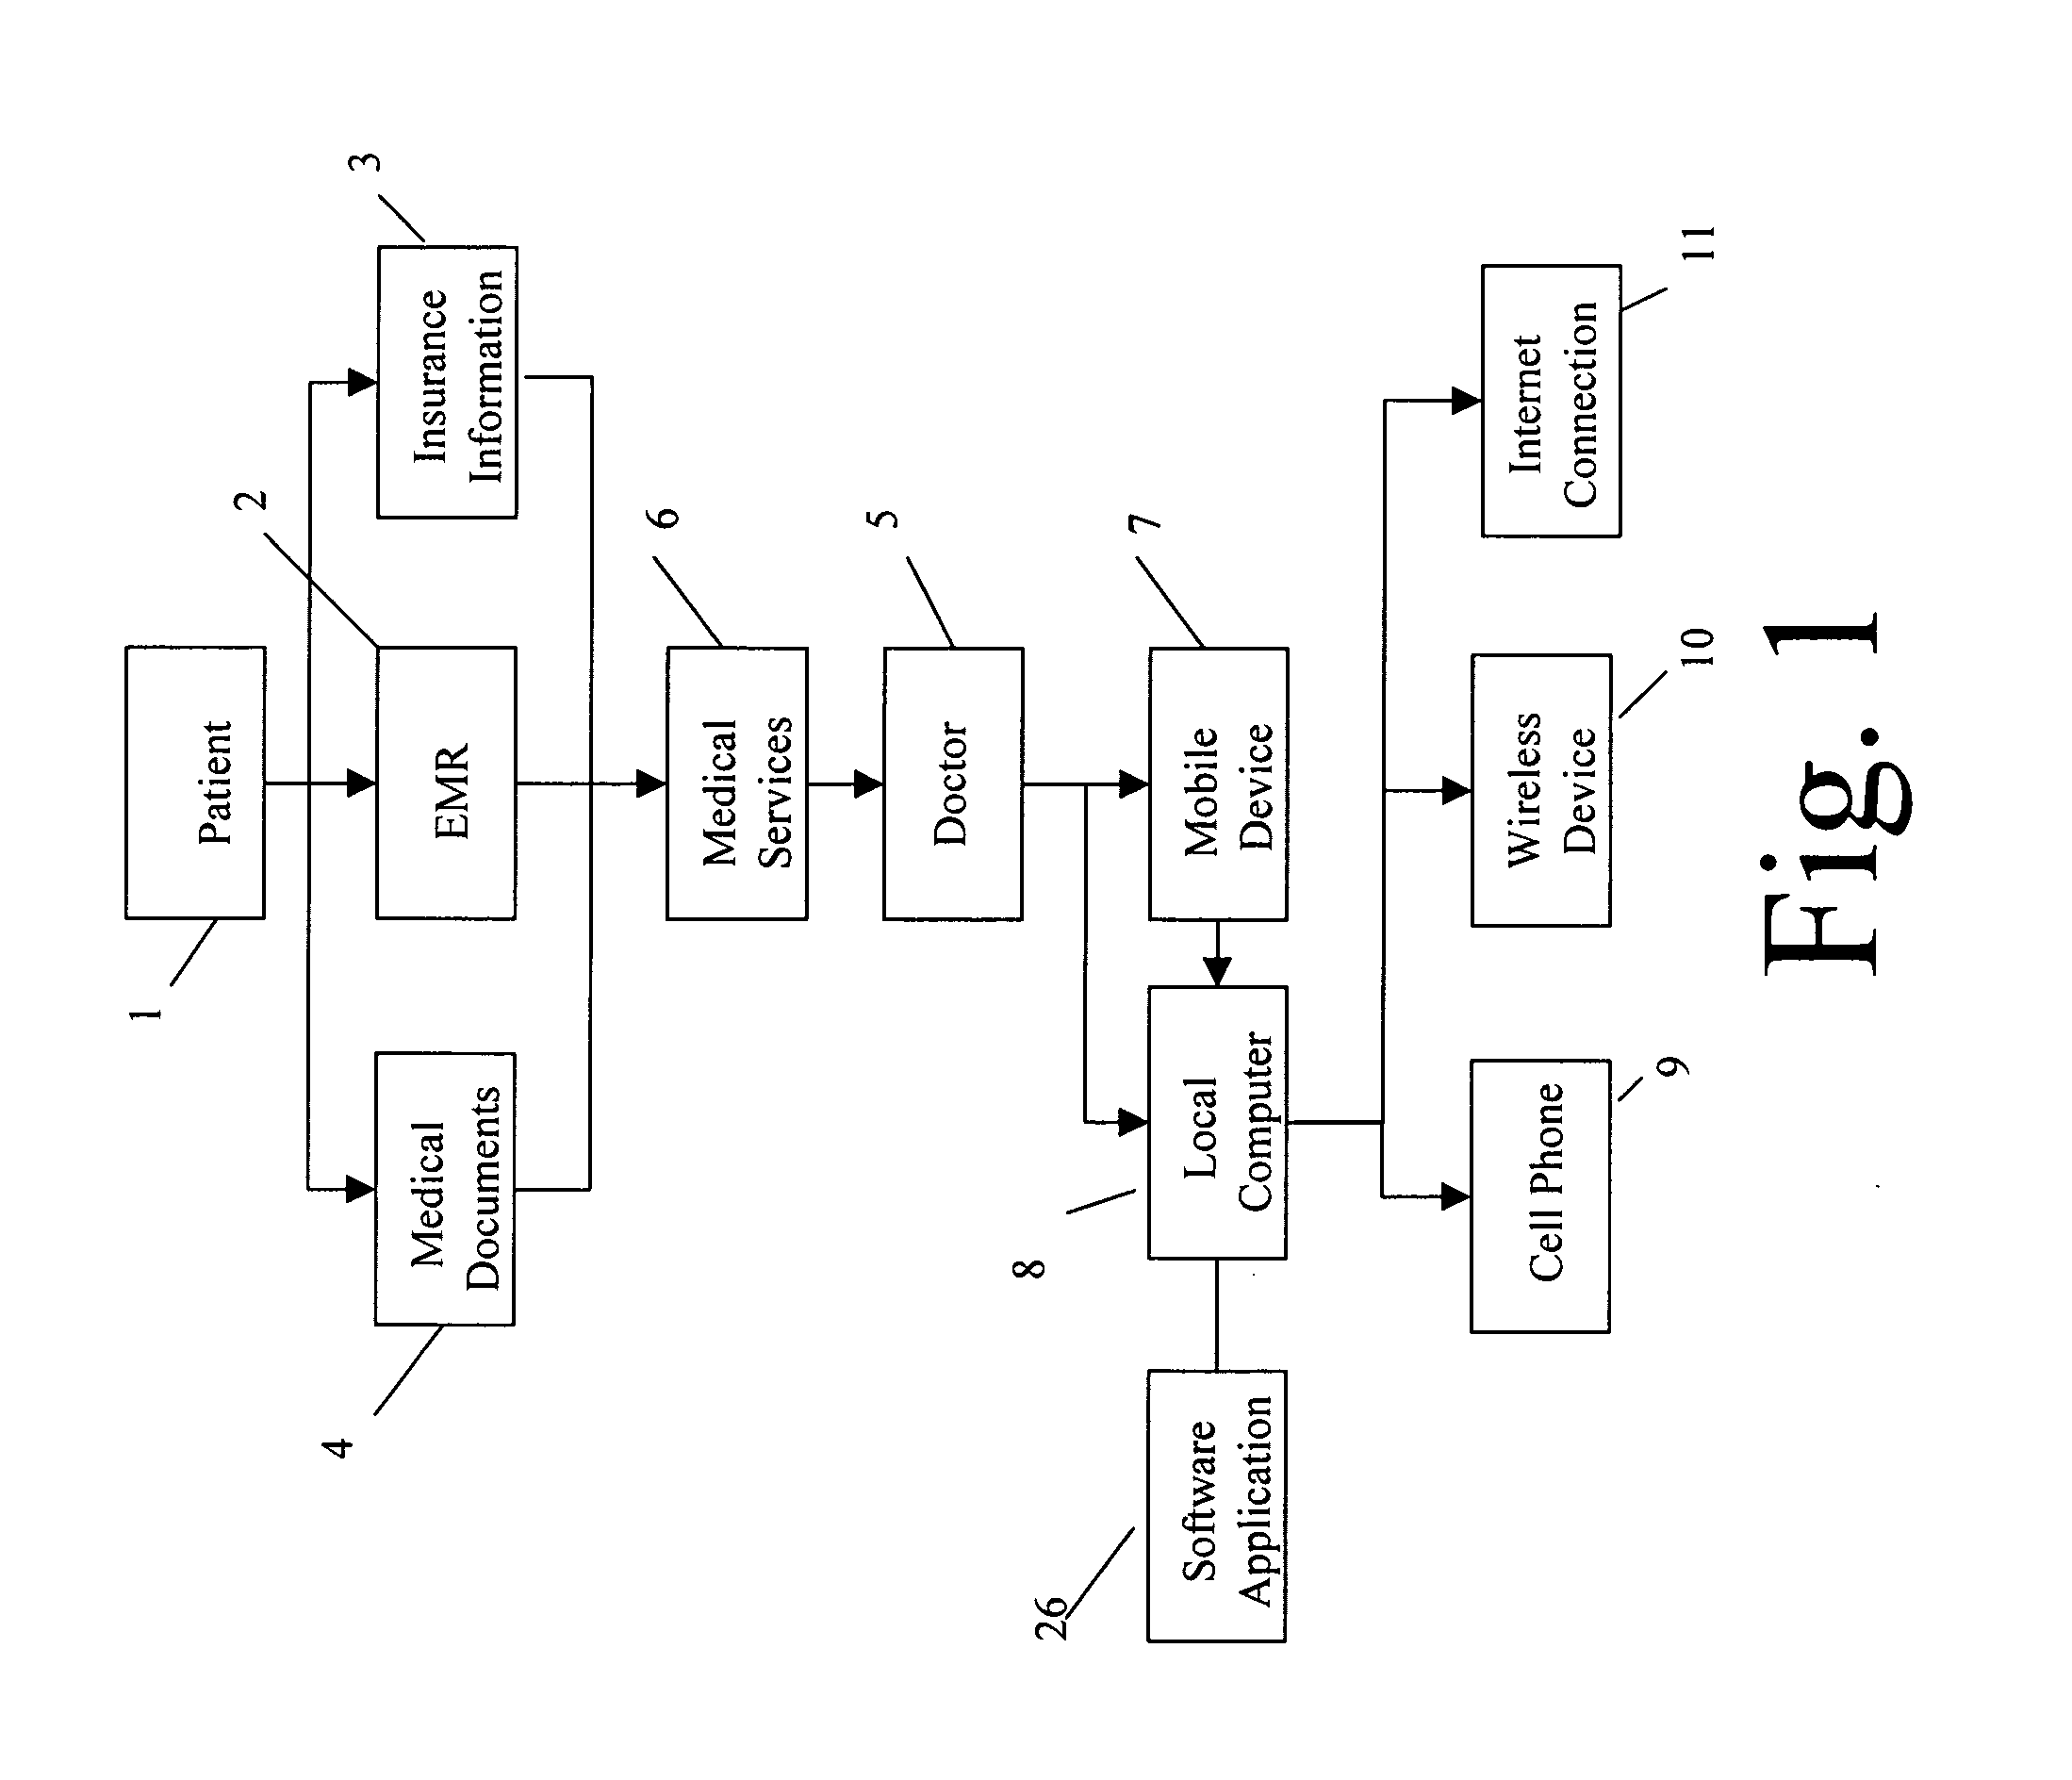 System and method for secure storing, displaying, organizing electronic, and transferring medical records